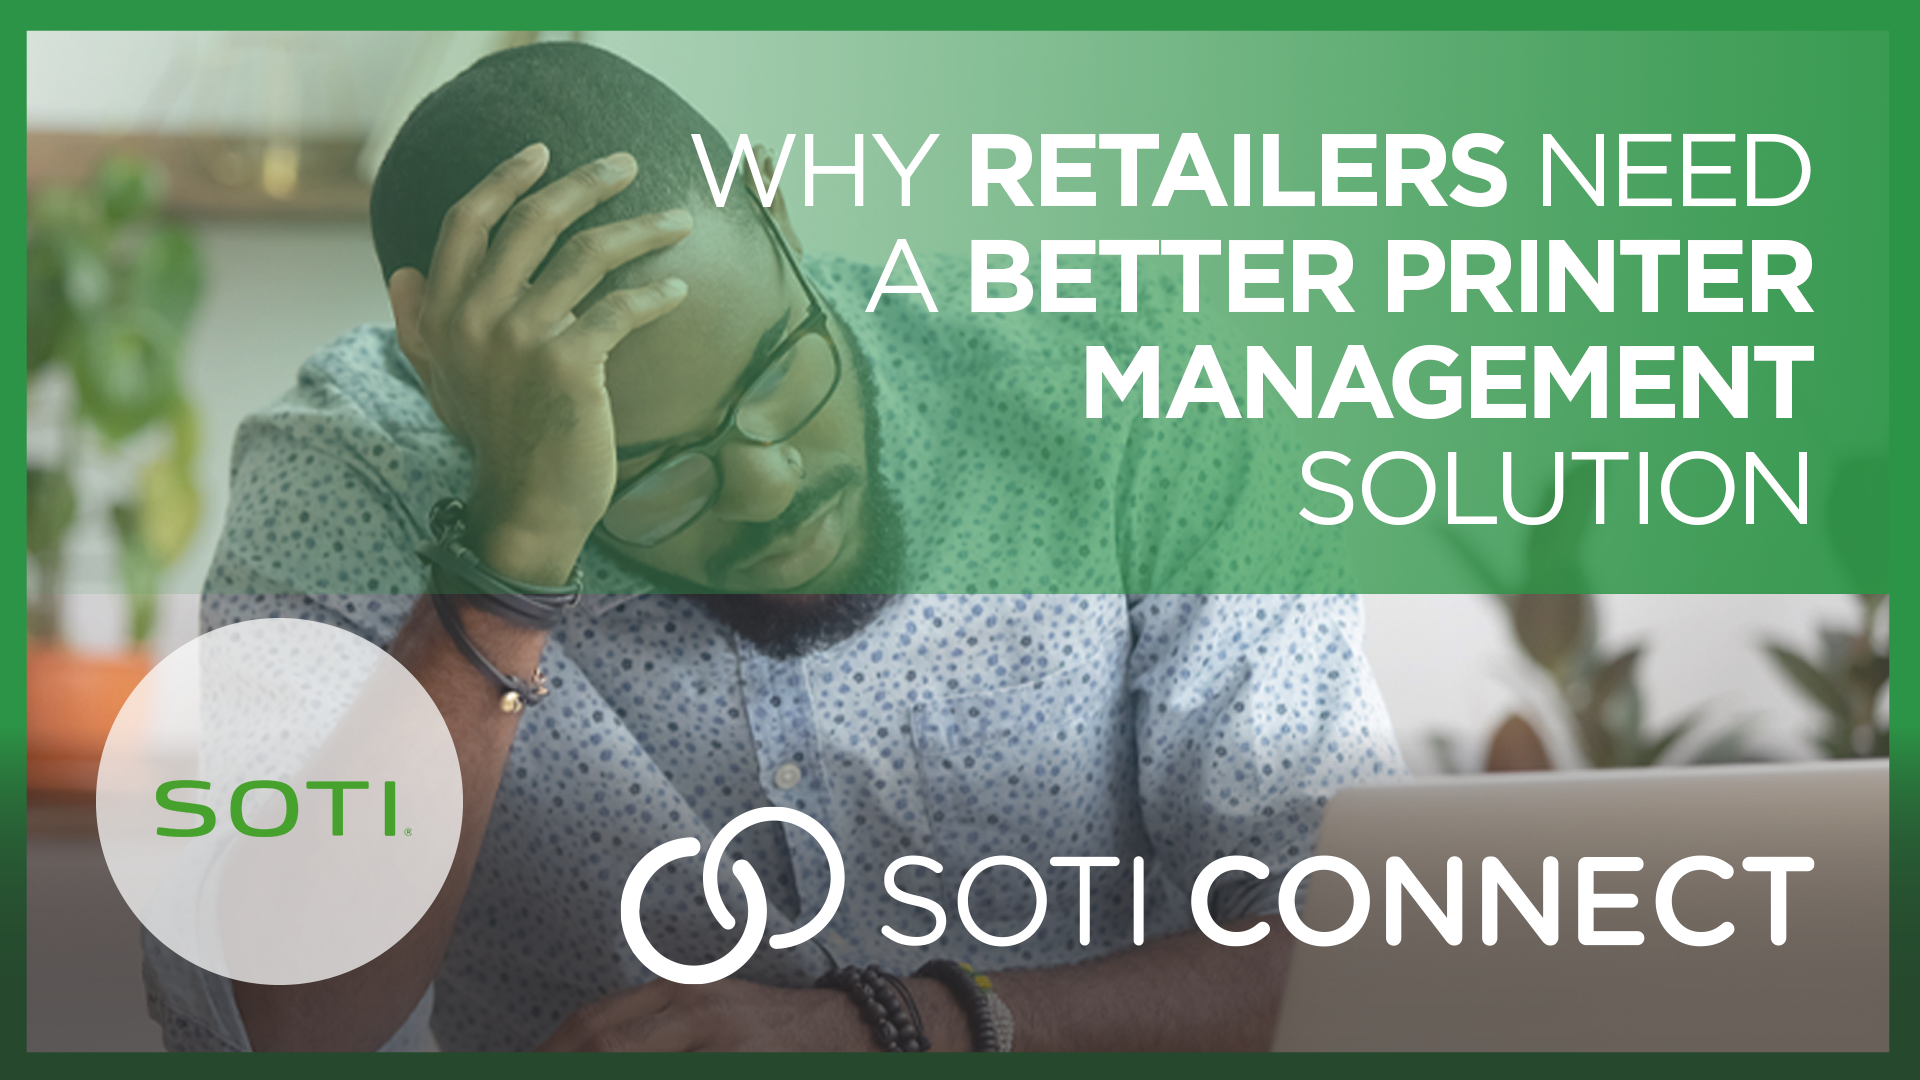 Why Retailers Need a Better Printer Management Solution Video